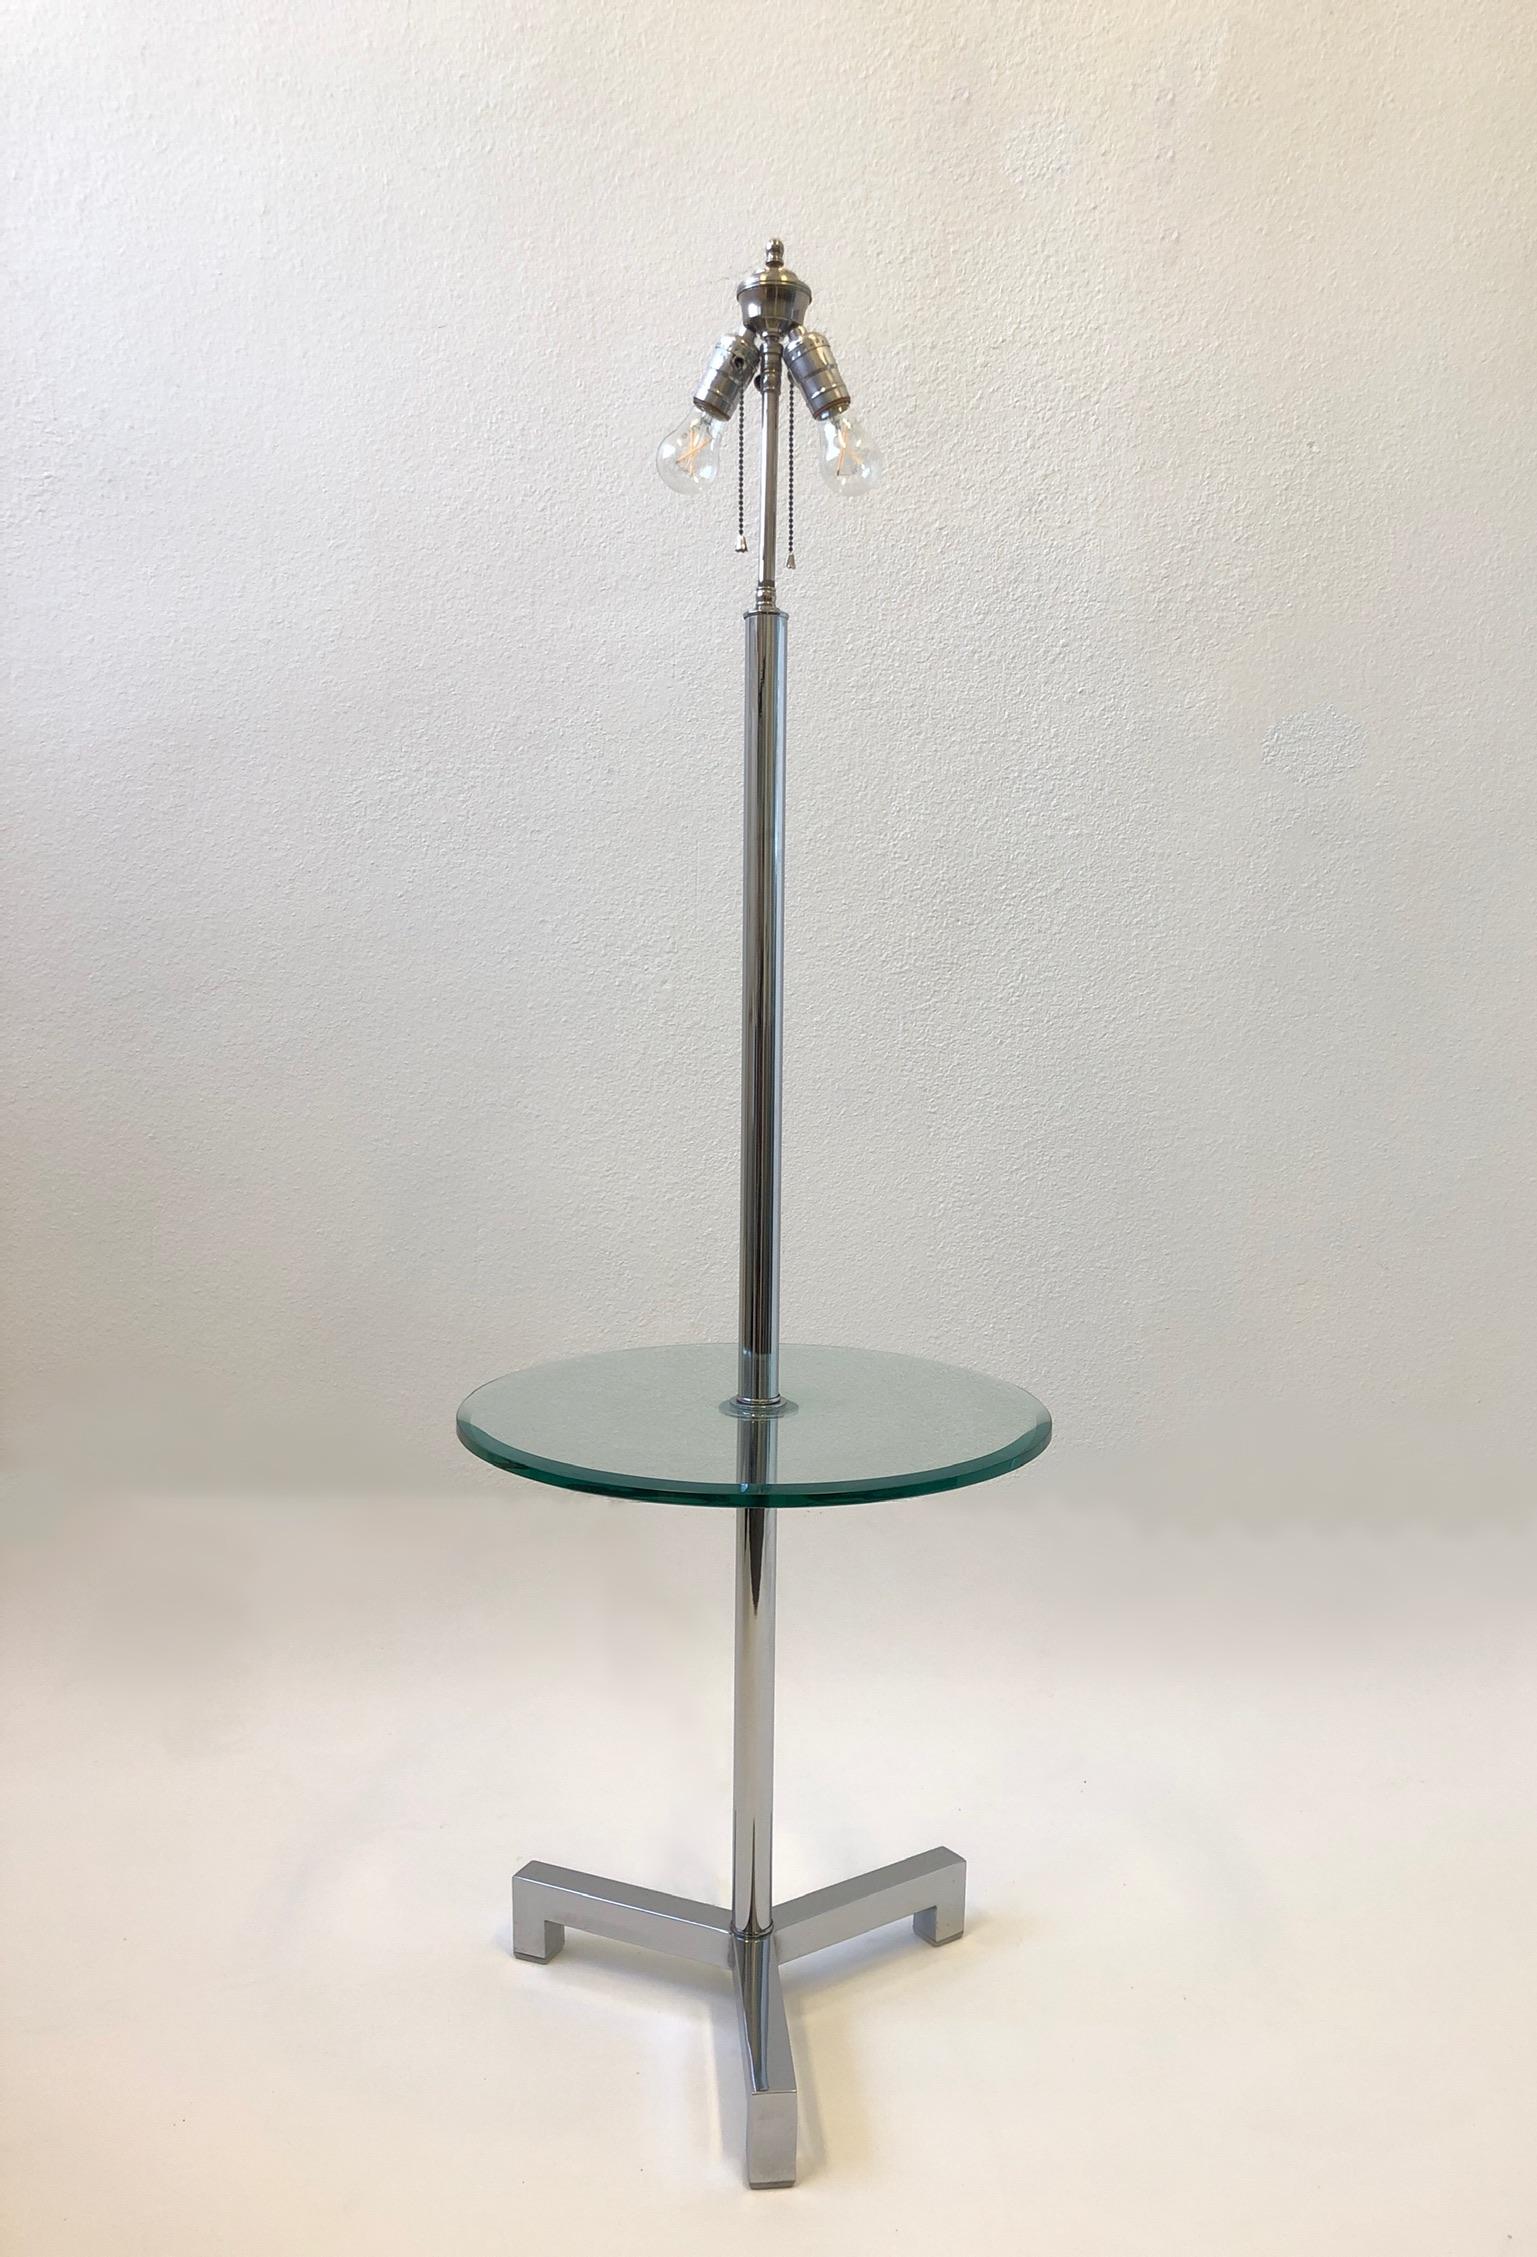 Glamorous polish chrome and beveled glass floor lamp table by Charles Hollis Jones.
According to CHJ he designed this for Arthur Elrod in the 1960’s.
Newly rewired and new vanilla linen shade.
Dimensions: 18” diameter, 52.5” high and 19.5” high